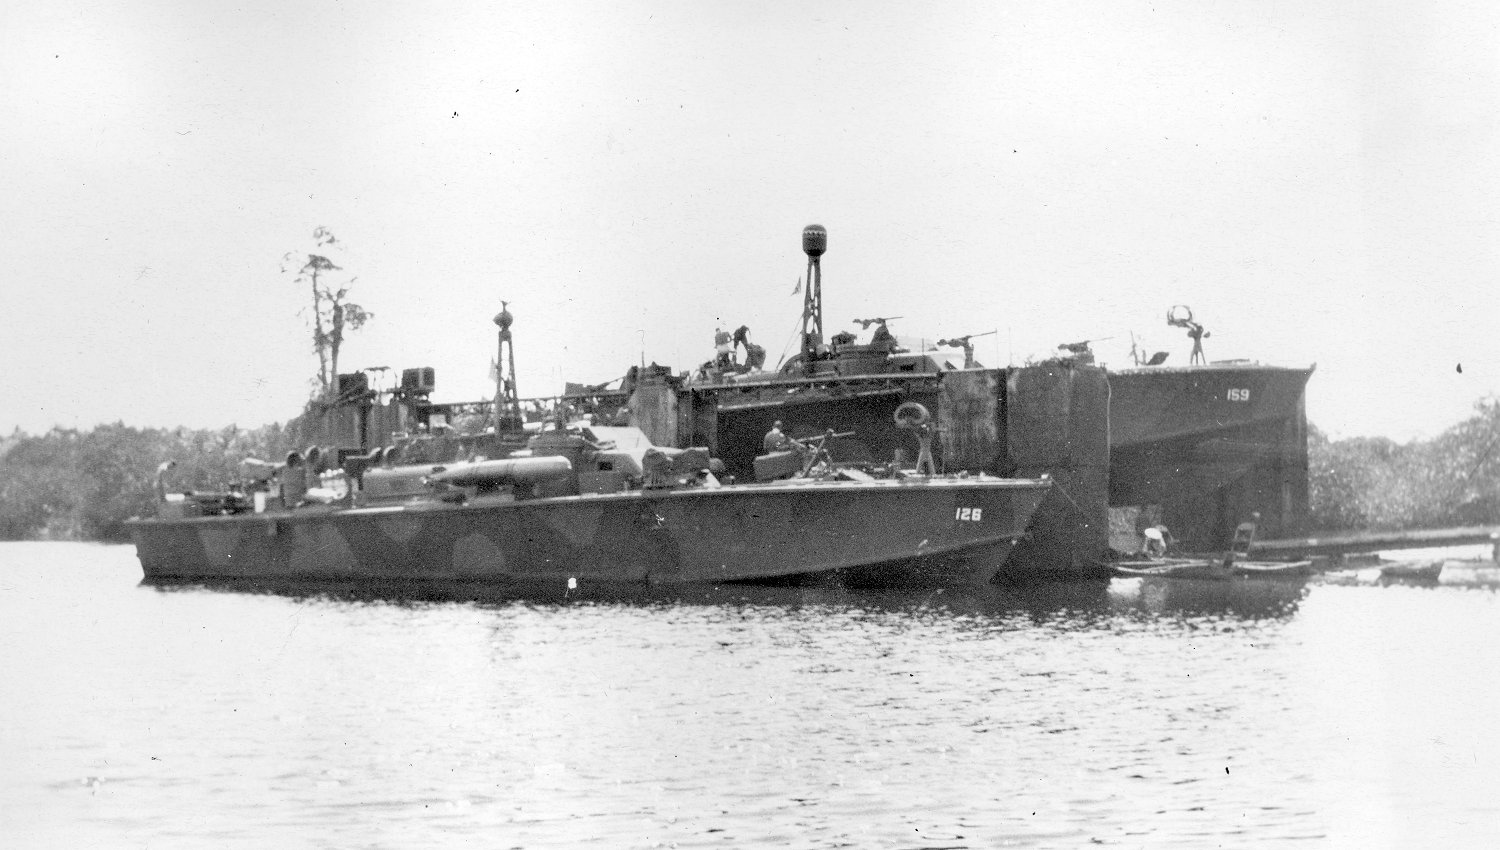 Elco 80-foot torpedo boats PT-126 and PT-159 at a floating drydock, 1944-45. Note mottled paint scheme, Mark XIII aerial torpedoes, Bofors 40mm guns aft, and 37mm cannon forward.